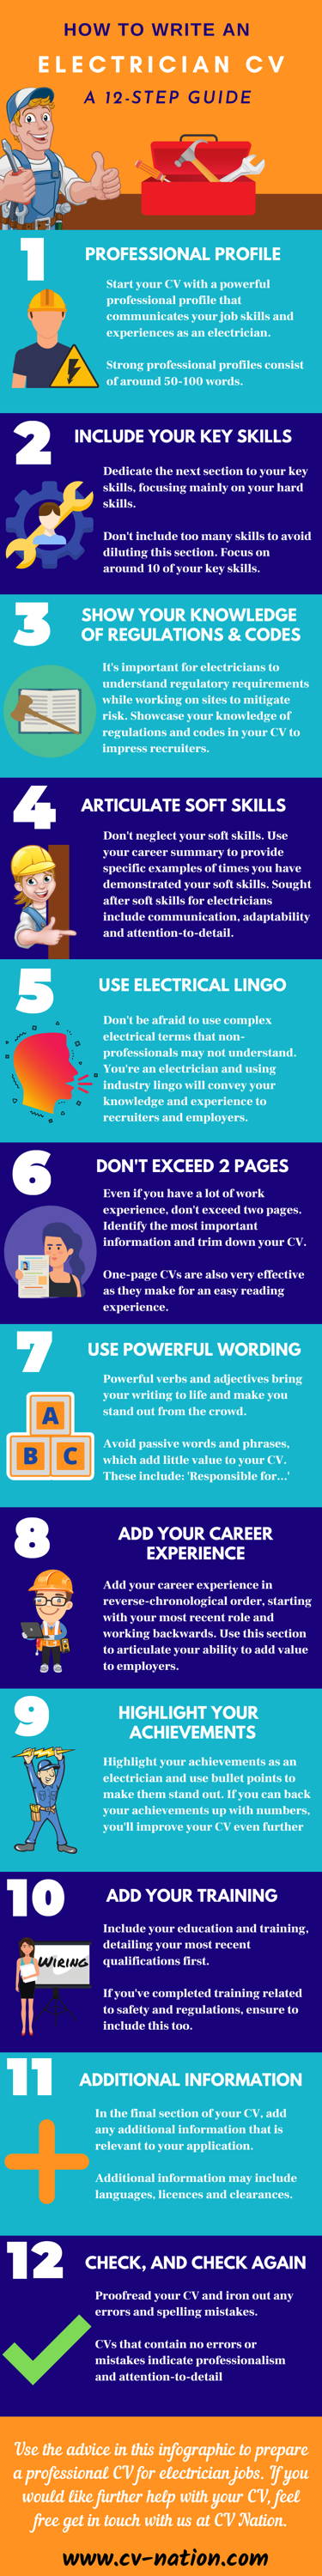 Electrician CV Writing Infographic